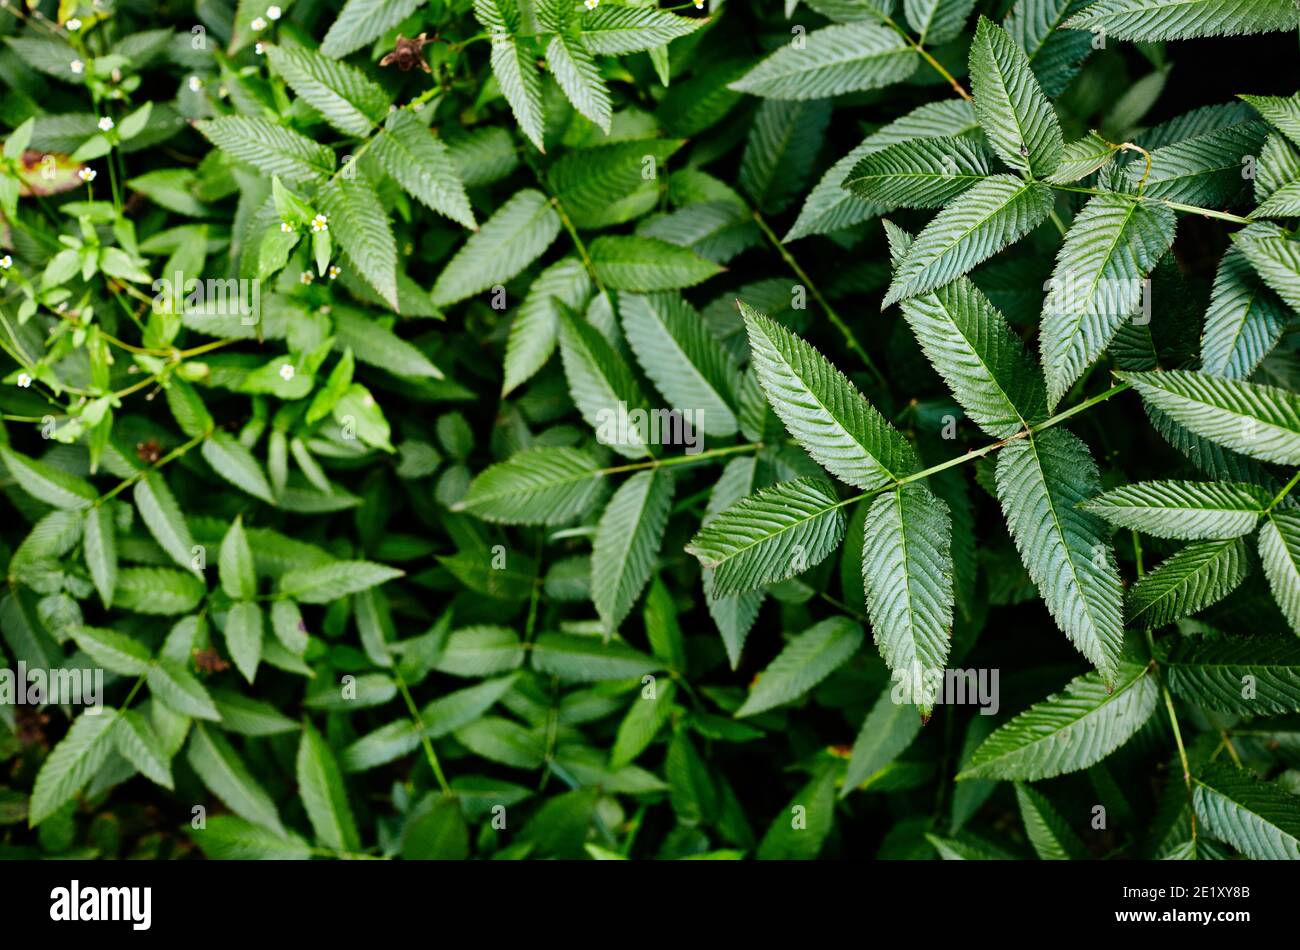 Abstract image of Rubus rosaefolius Miao miao leaves in the garden. Roseleaf raspberry (hybrid of raspberry and strawberry) Stock Photo